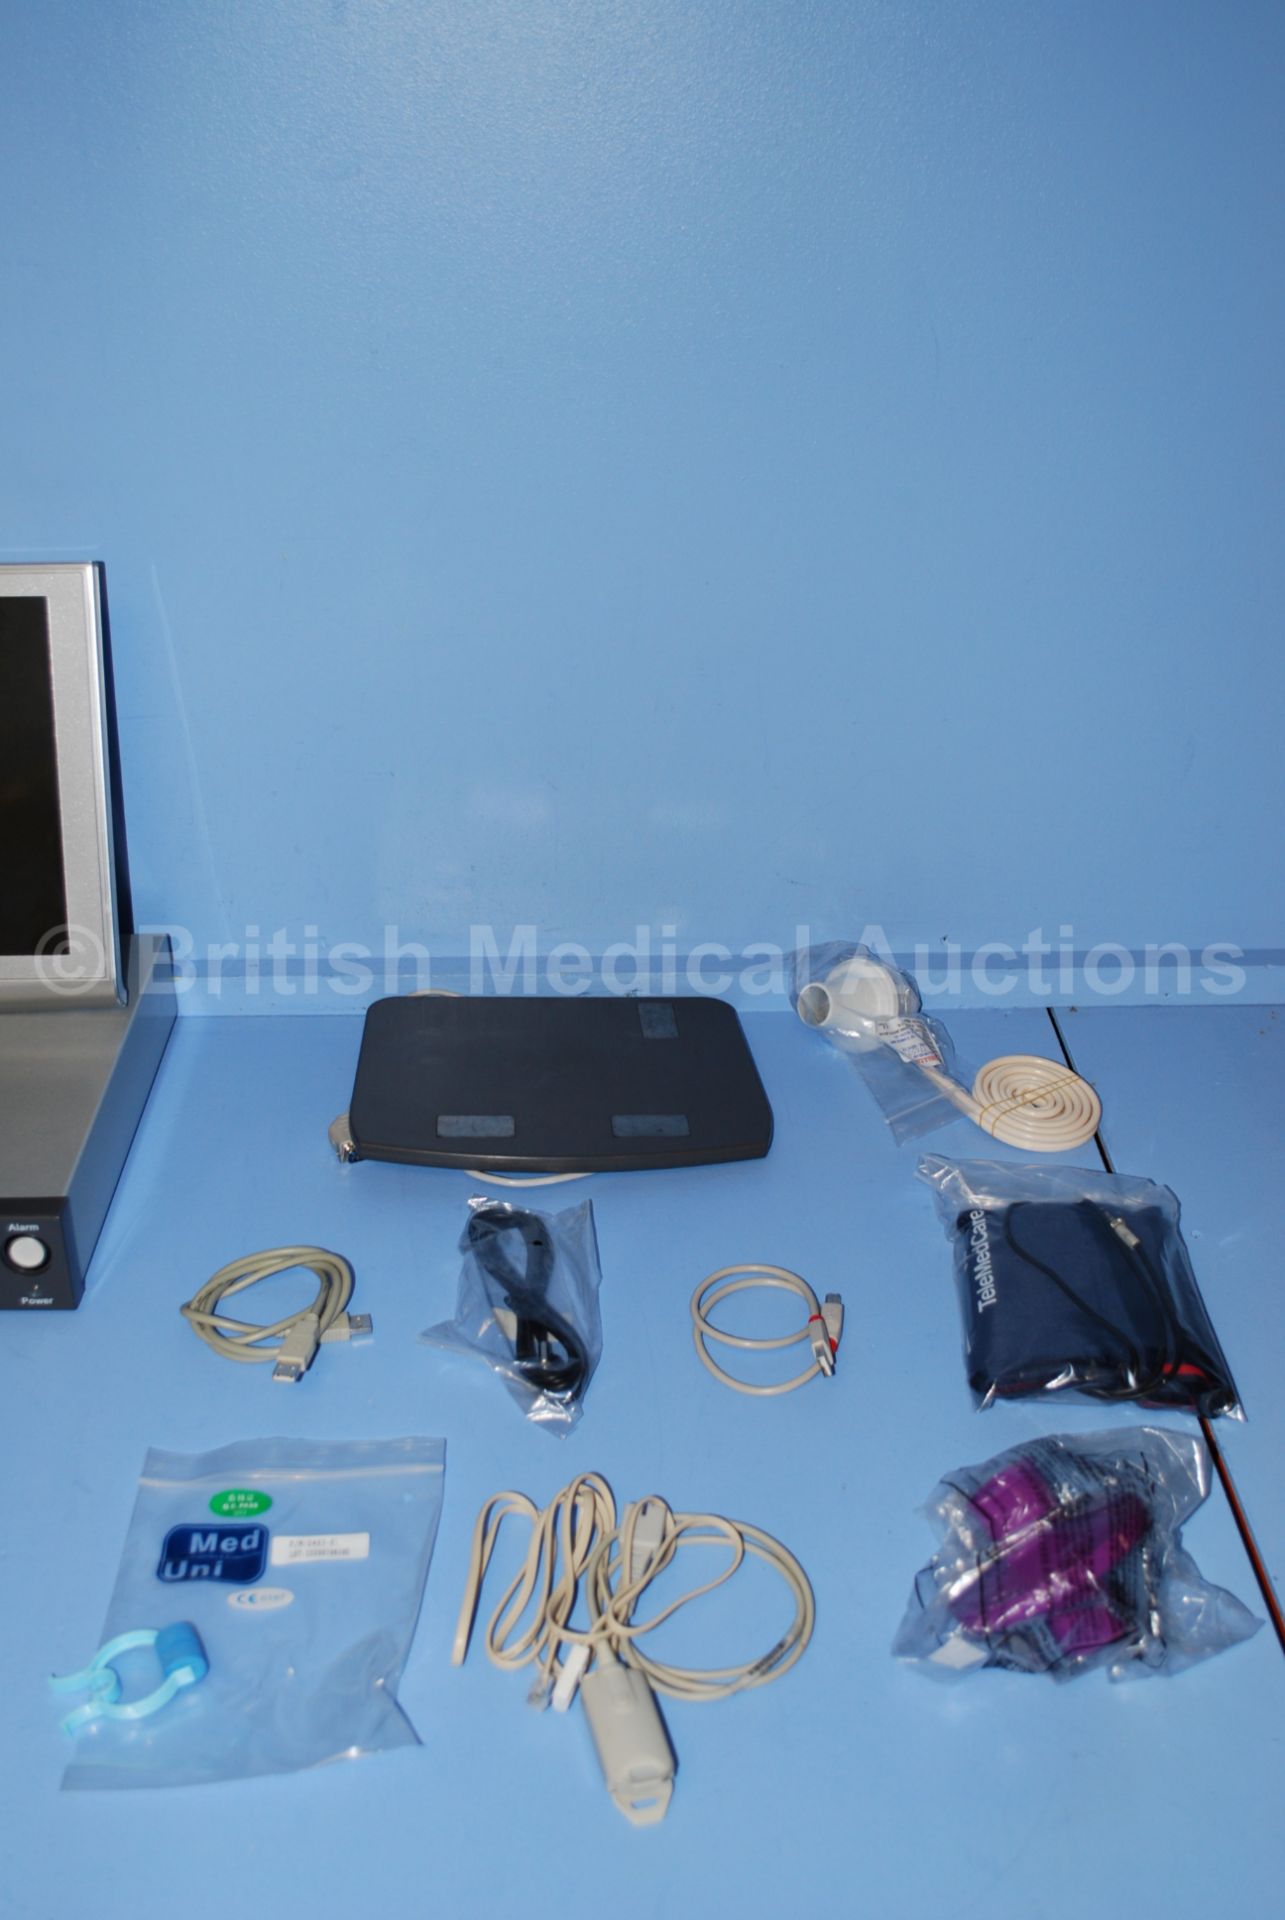 TeleMedCare Health Monitoring System Including Wor - Image 5 of 6